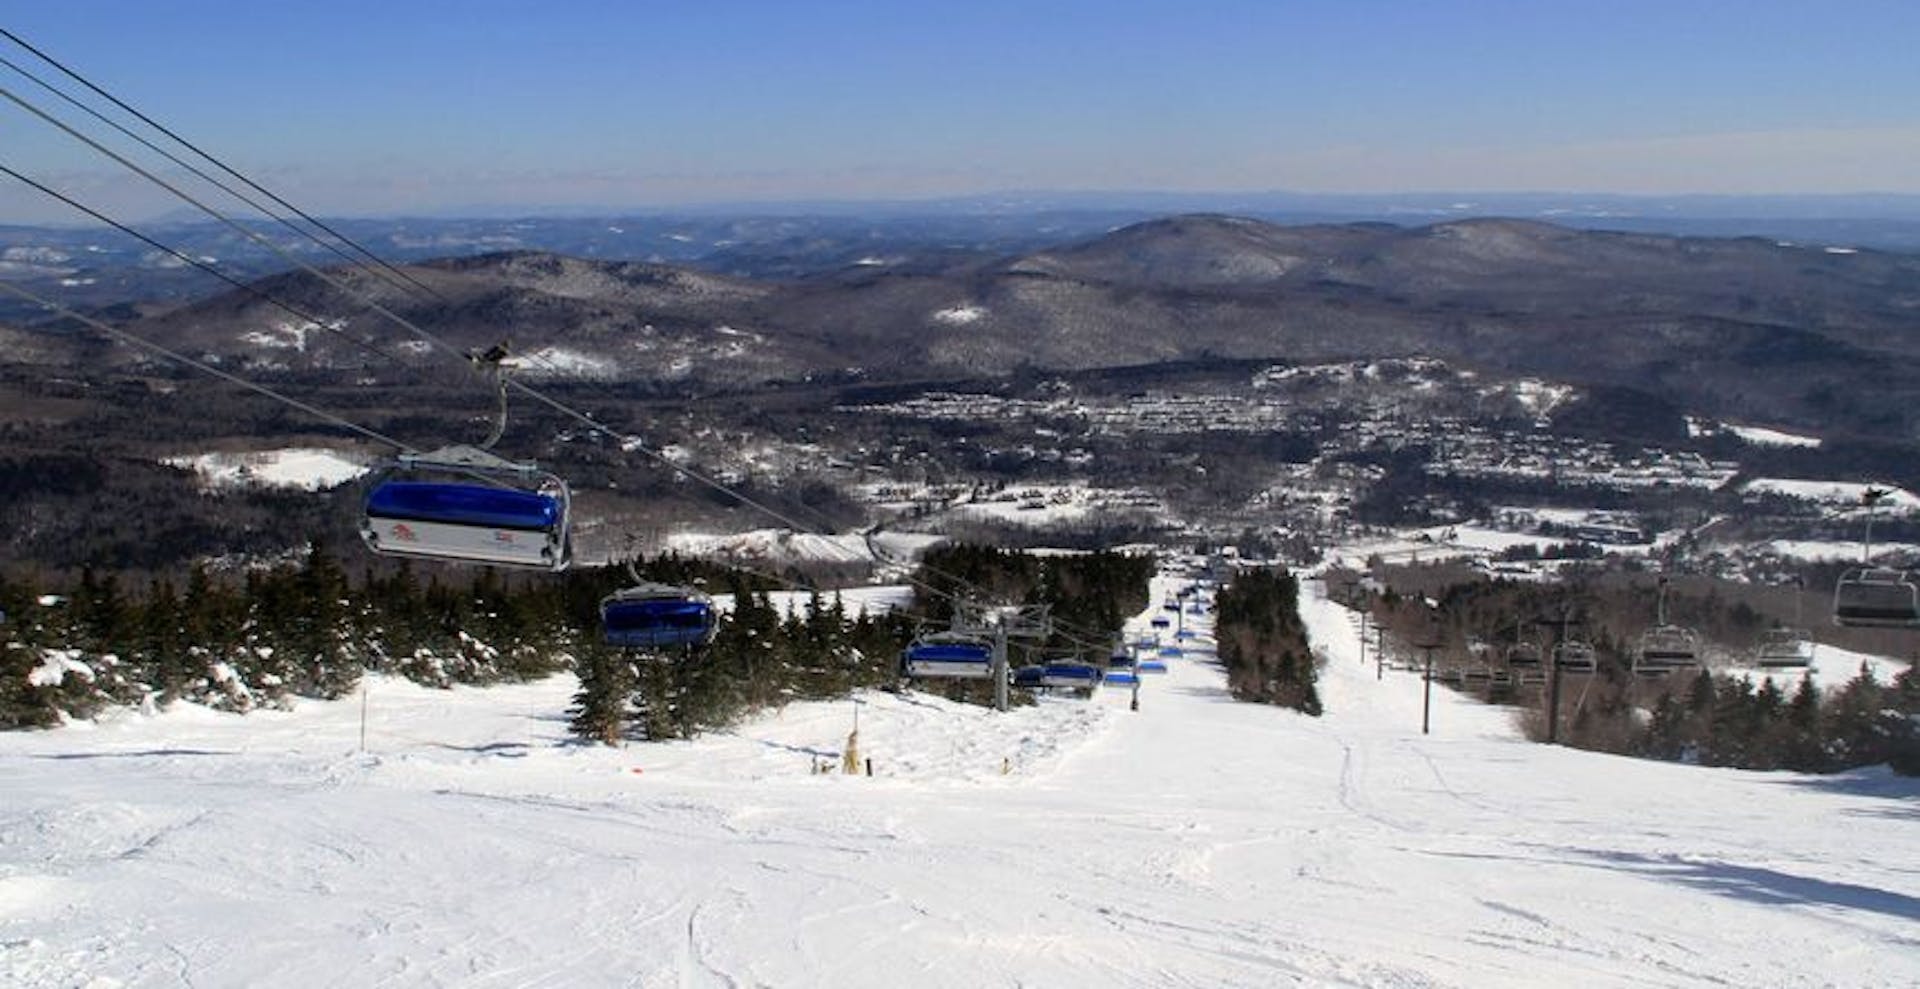 A huge part of Mount Snow’s mountain is dedicated to terrain parks